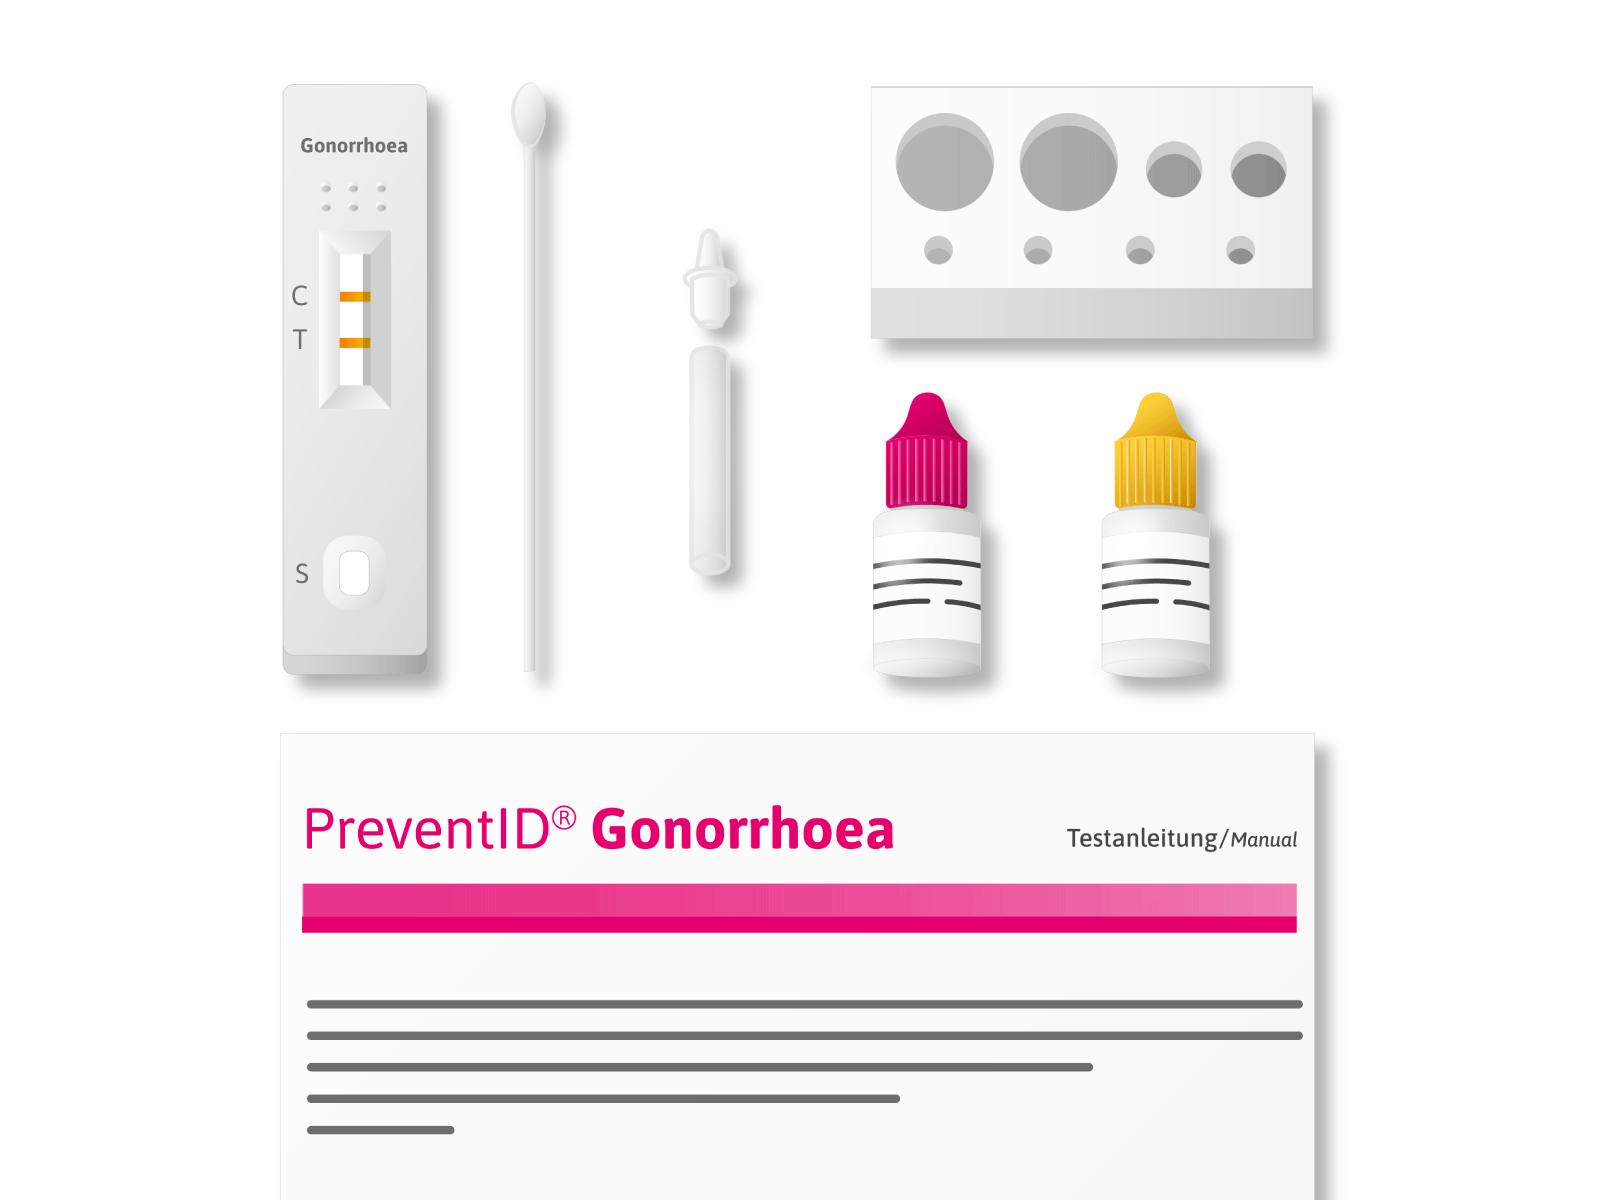 PreventID® Gonorrhoea